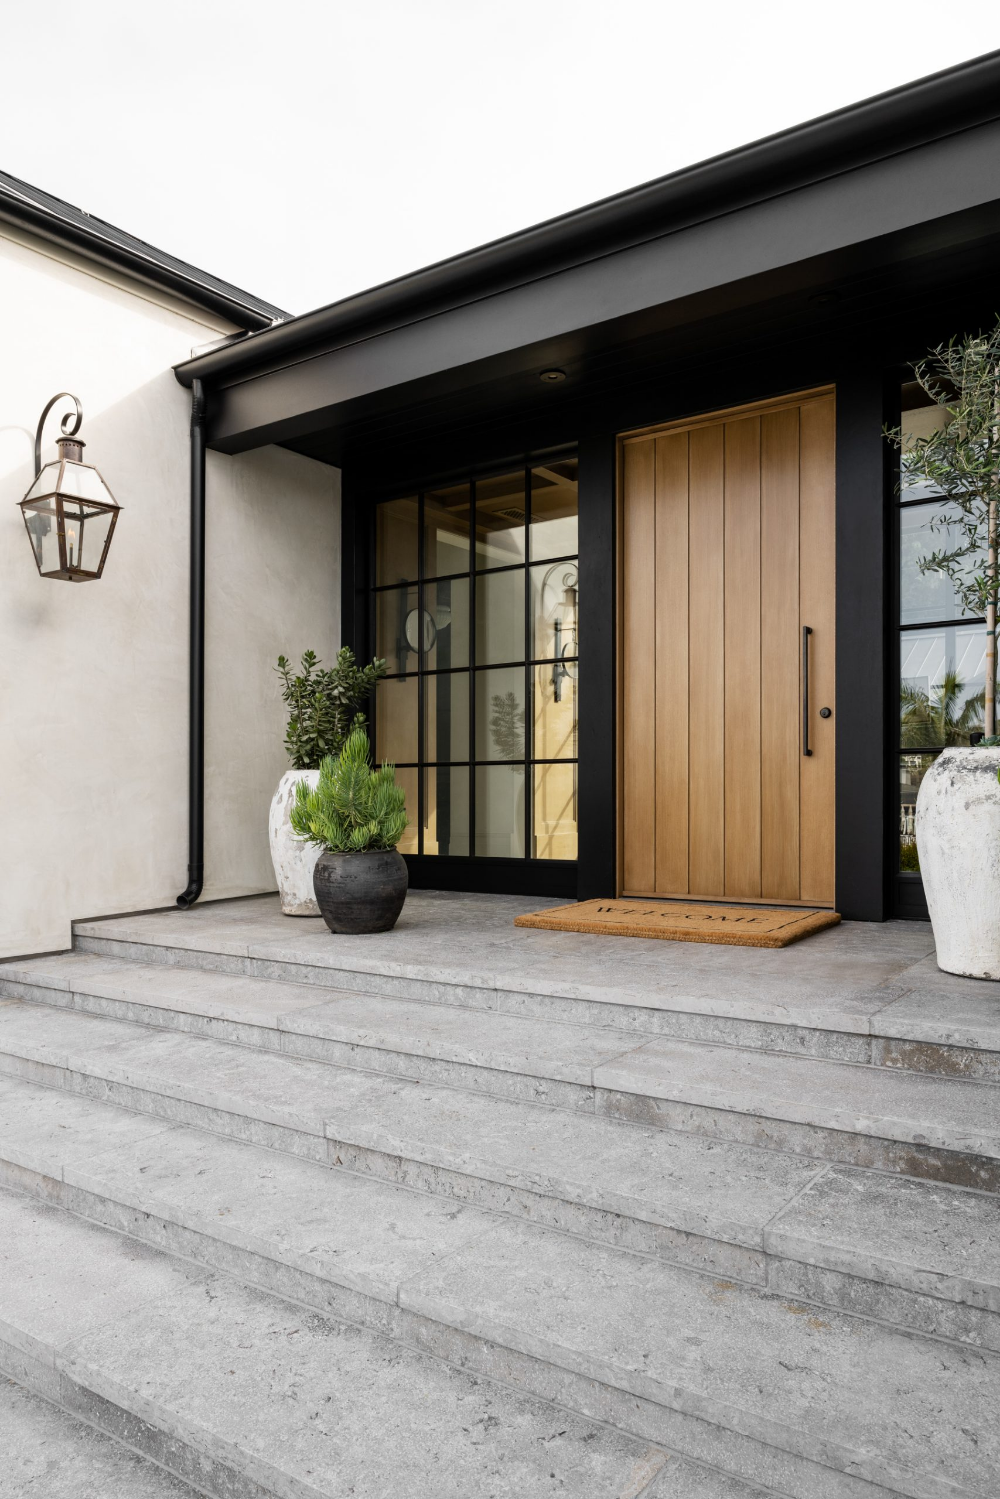 The Art of Front House Design: Creating a Welcoming Entrance